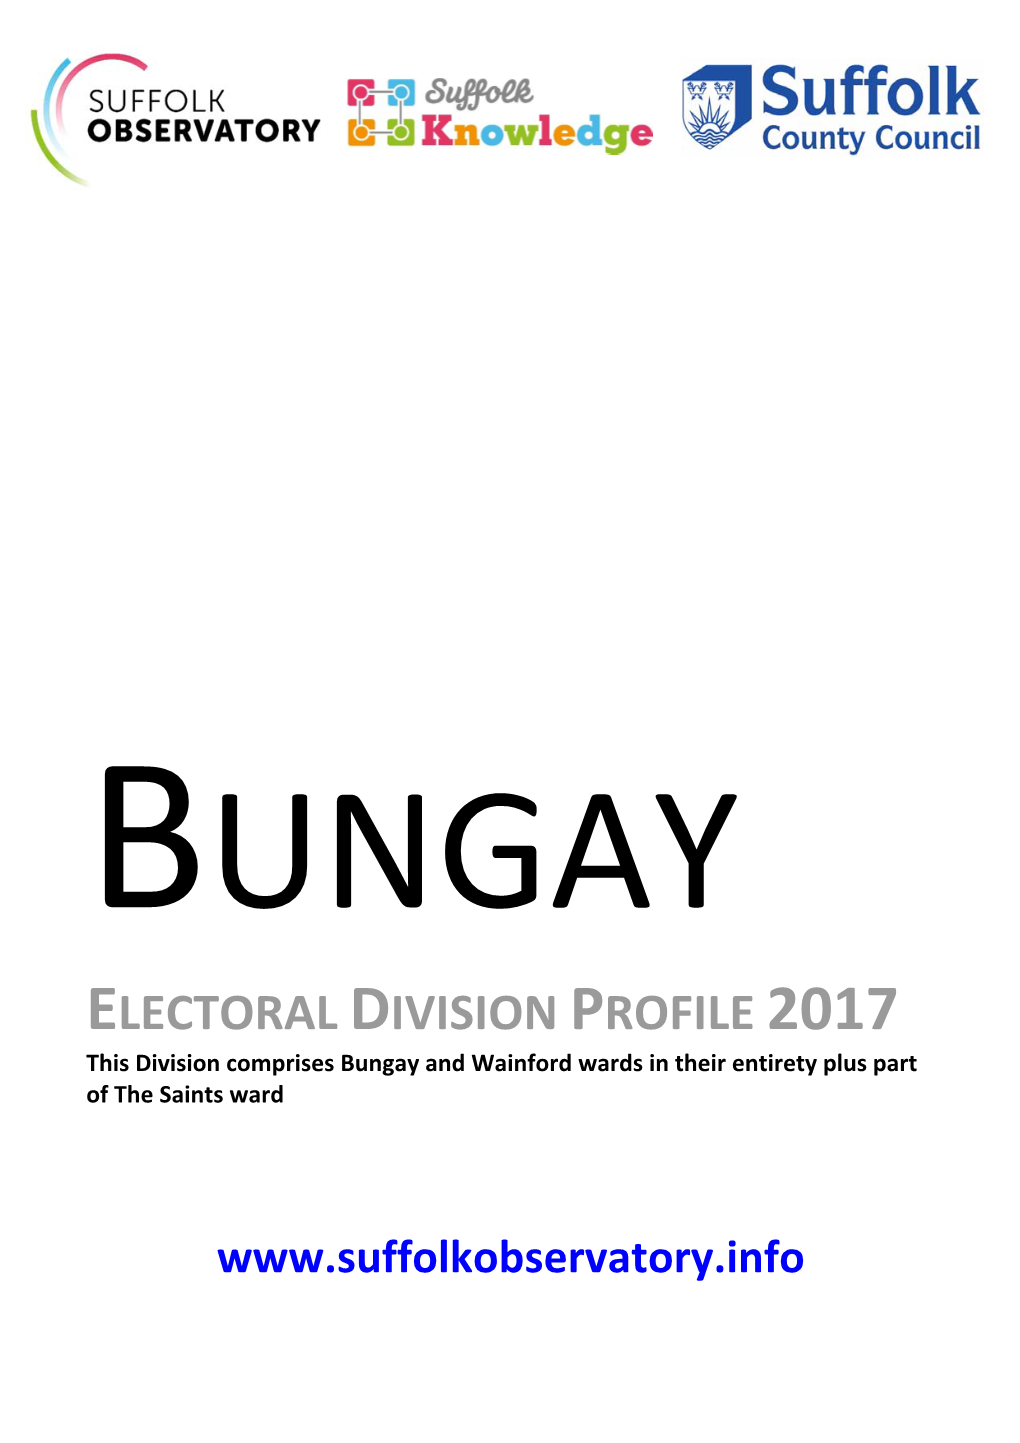 ELECTORAL DIVISION PROFILE 2017 This Division Comprises Bungay and Wainford Wards in Their Entirety Plus Part of the Saints Ward